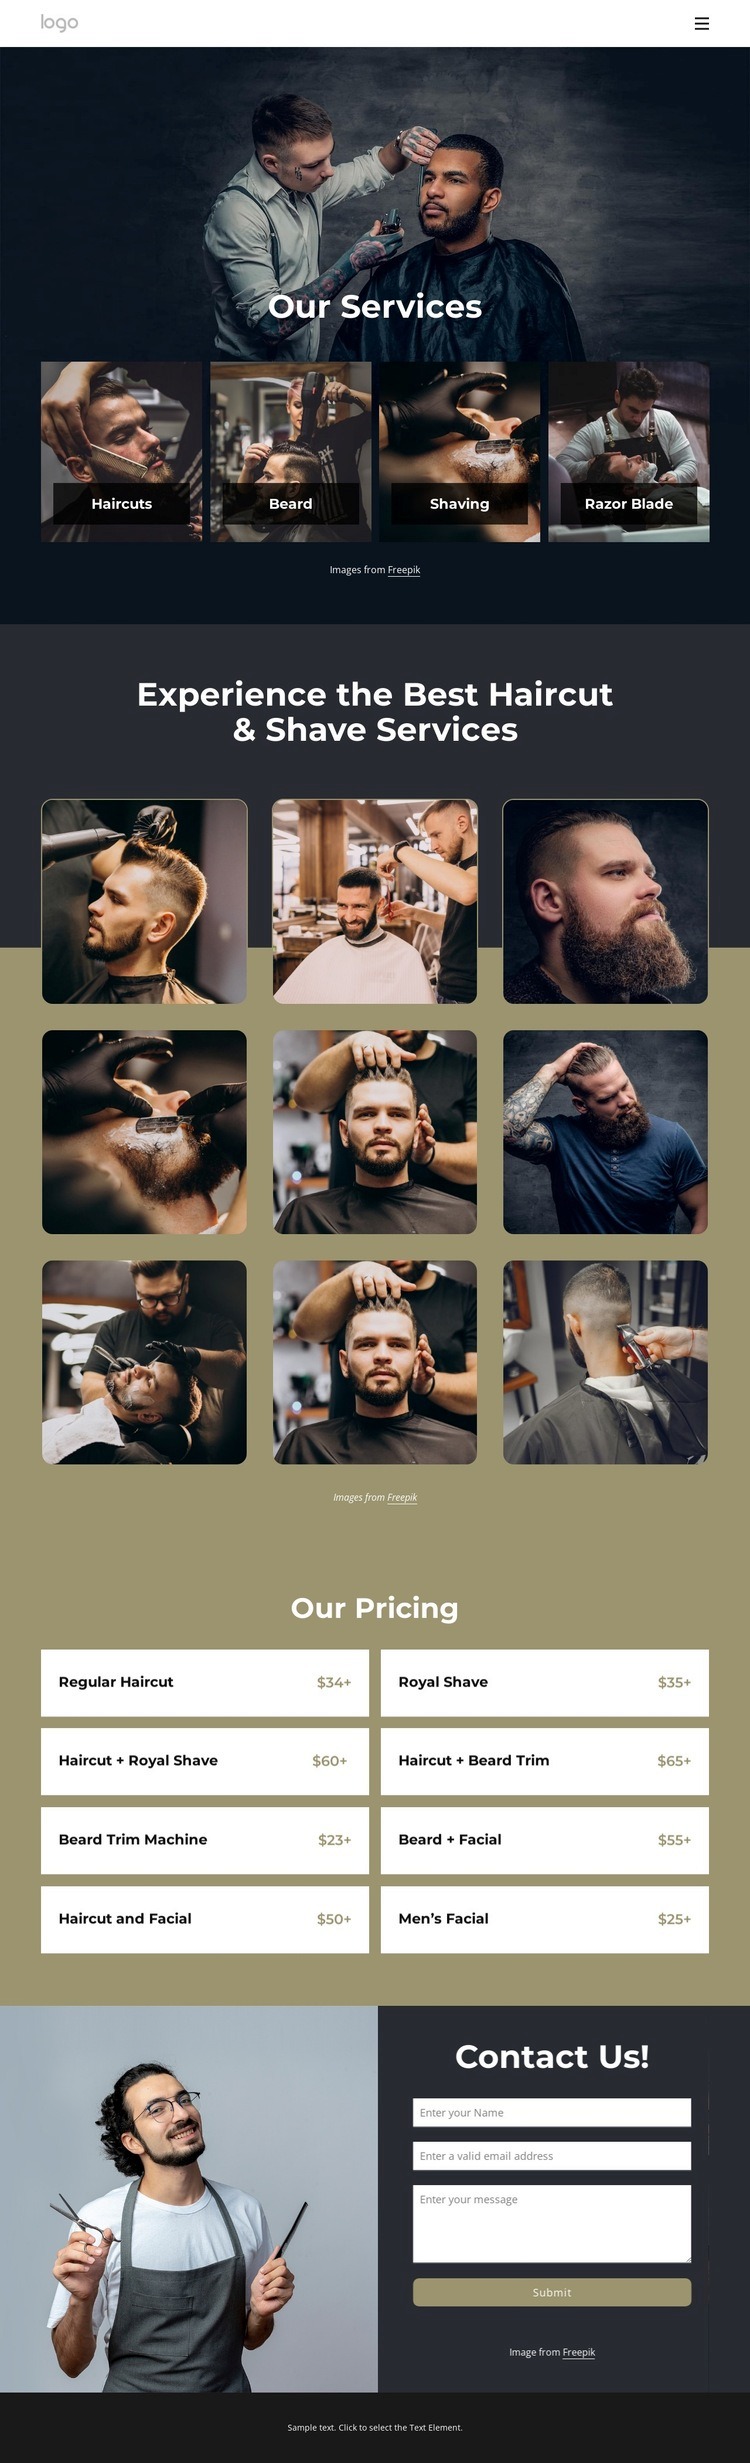 Best haircut and shave services Web Page Design